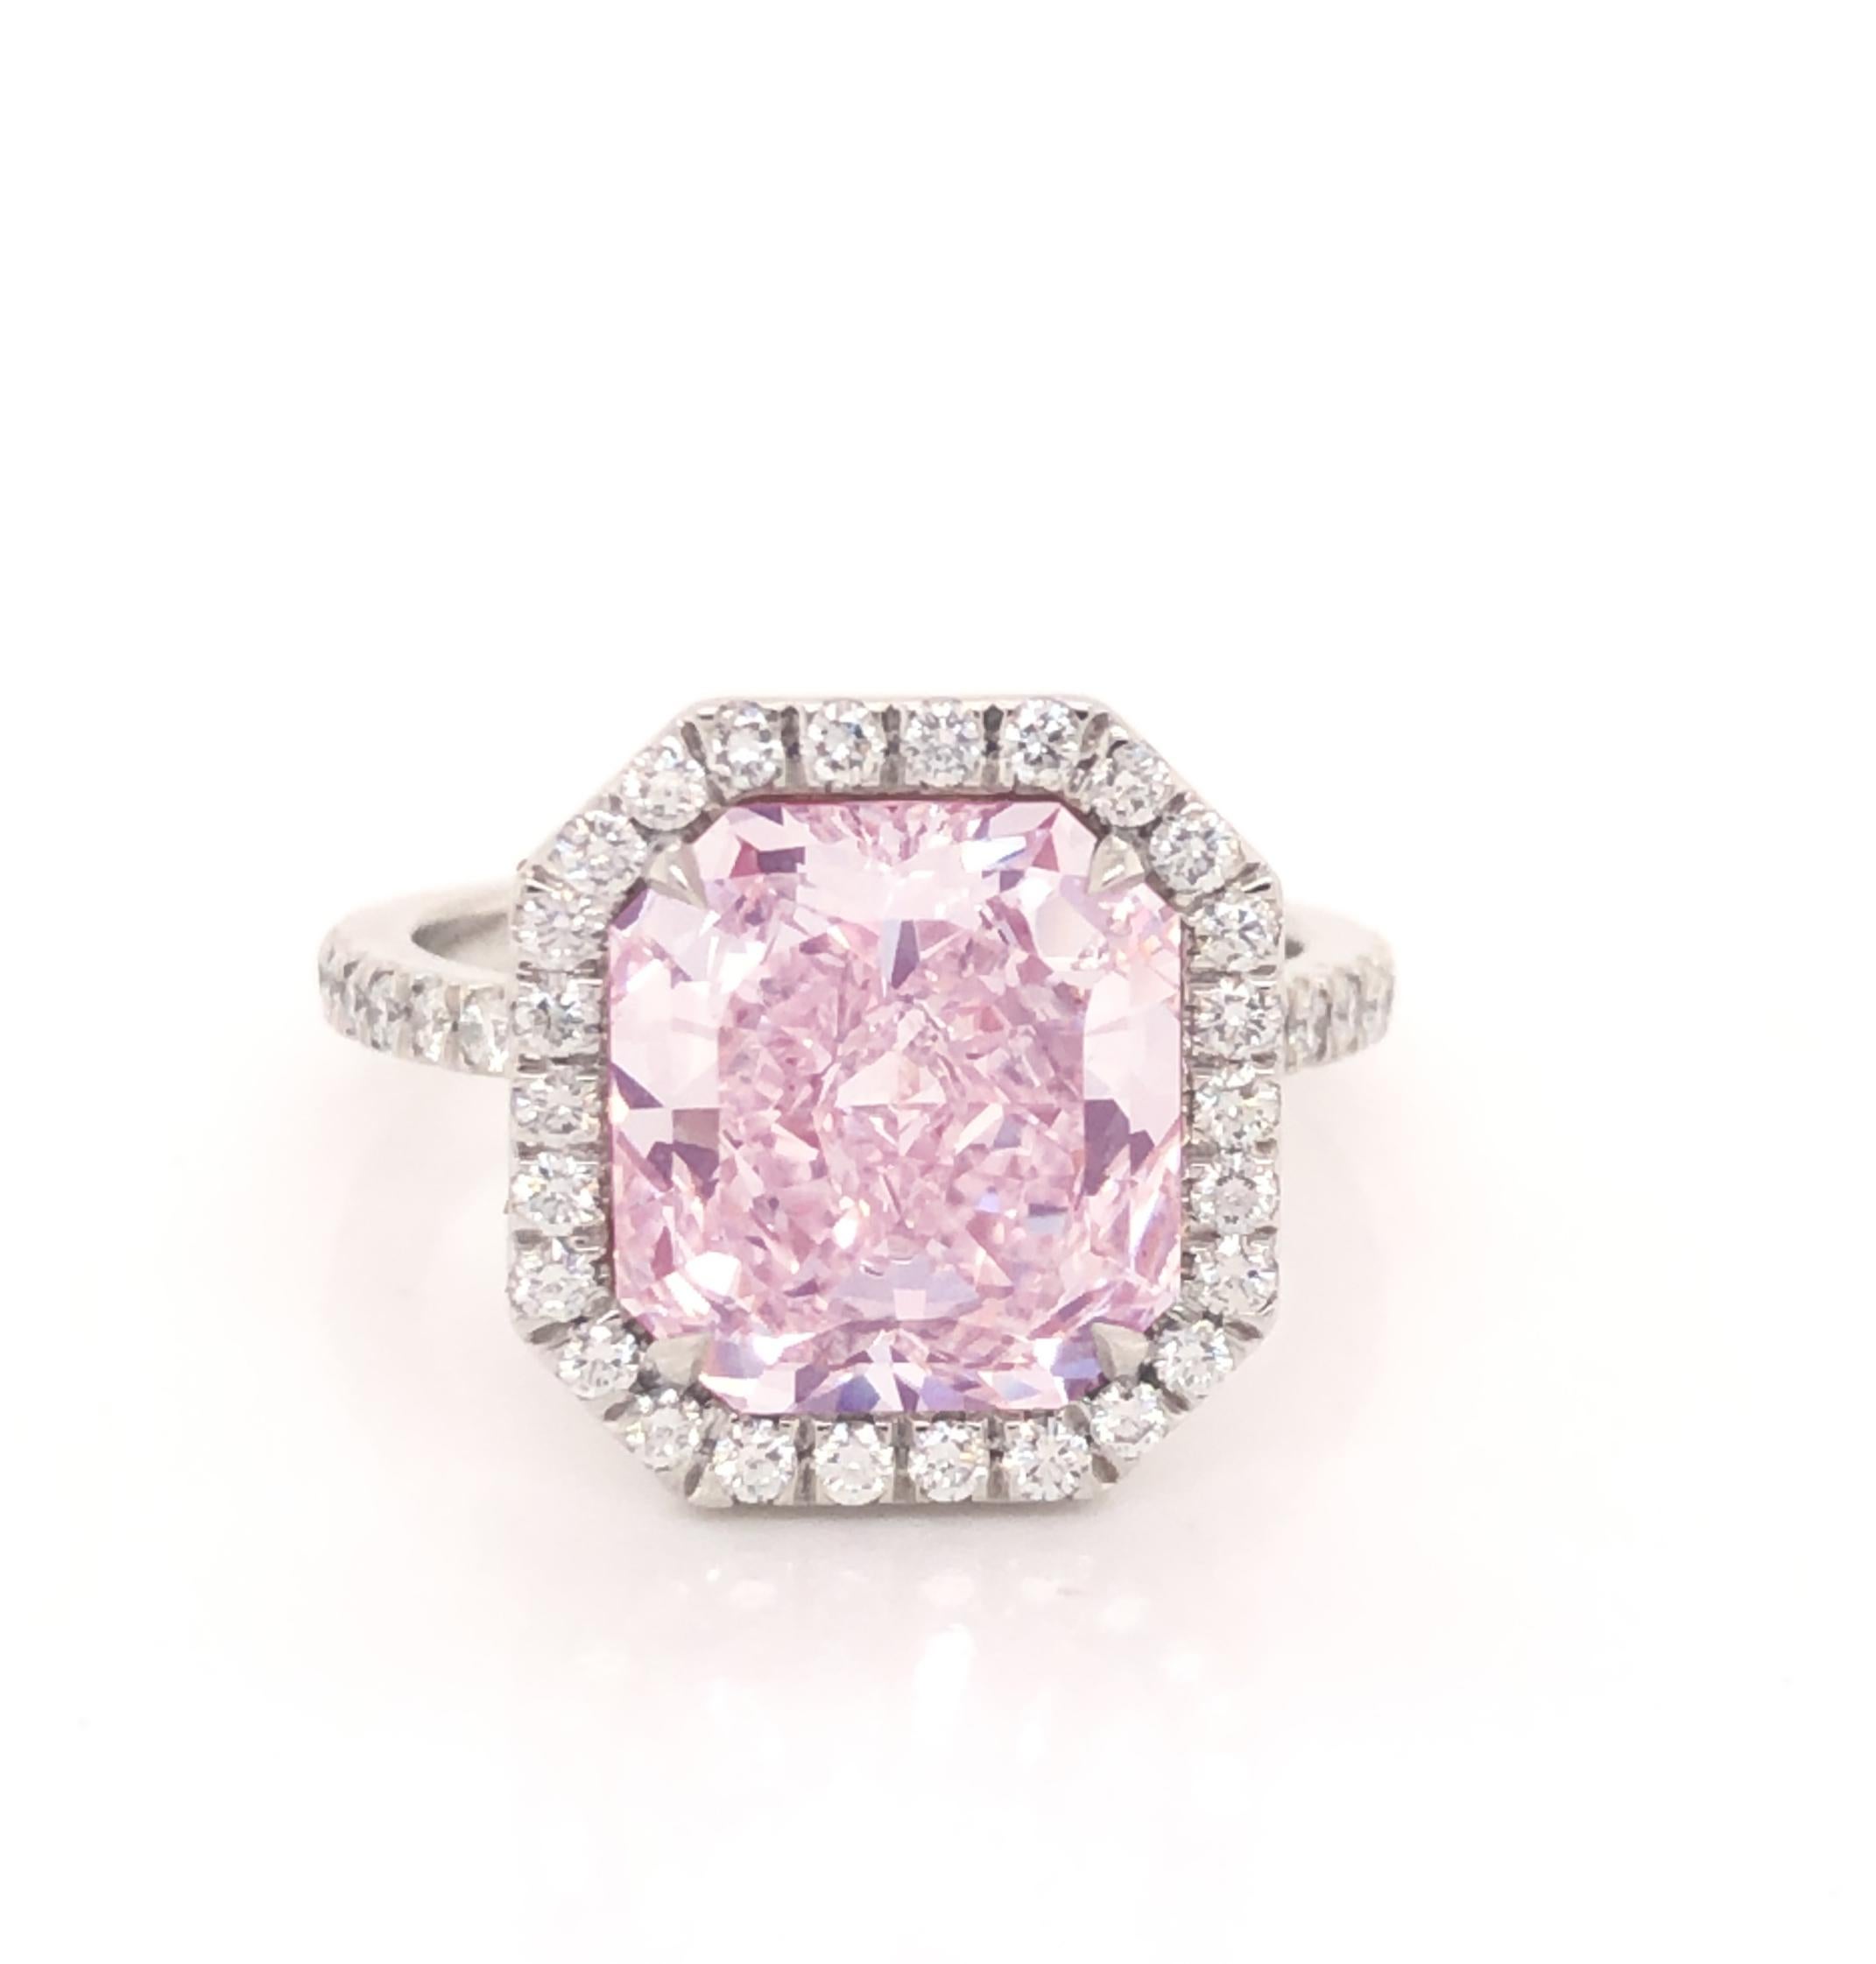 Beautiful hand made ring crafted in platinum by master jewelers. The focal point of the ring is one of the rarest diamonds in the world. A natural pink diamond. The center stone is one radiant cut diamond. Accompanied by a GIA certificate, the